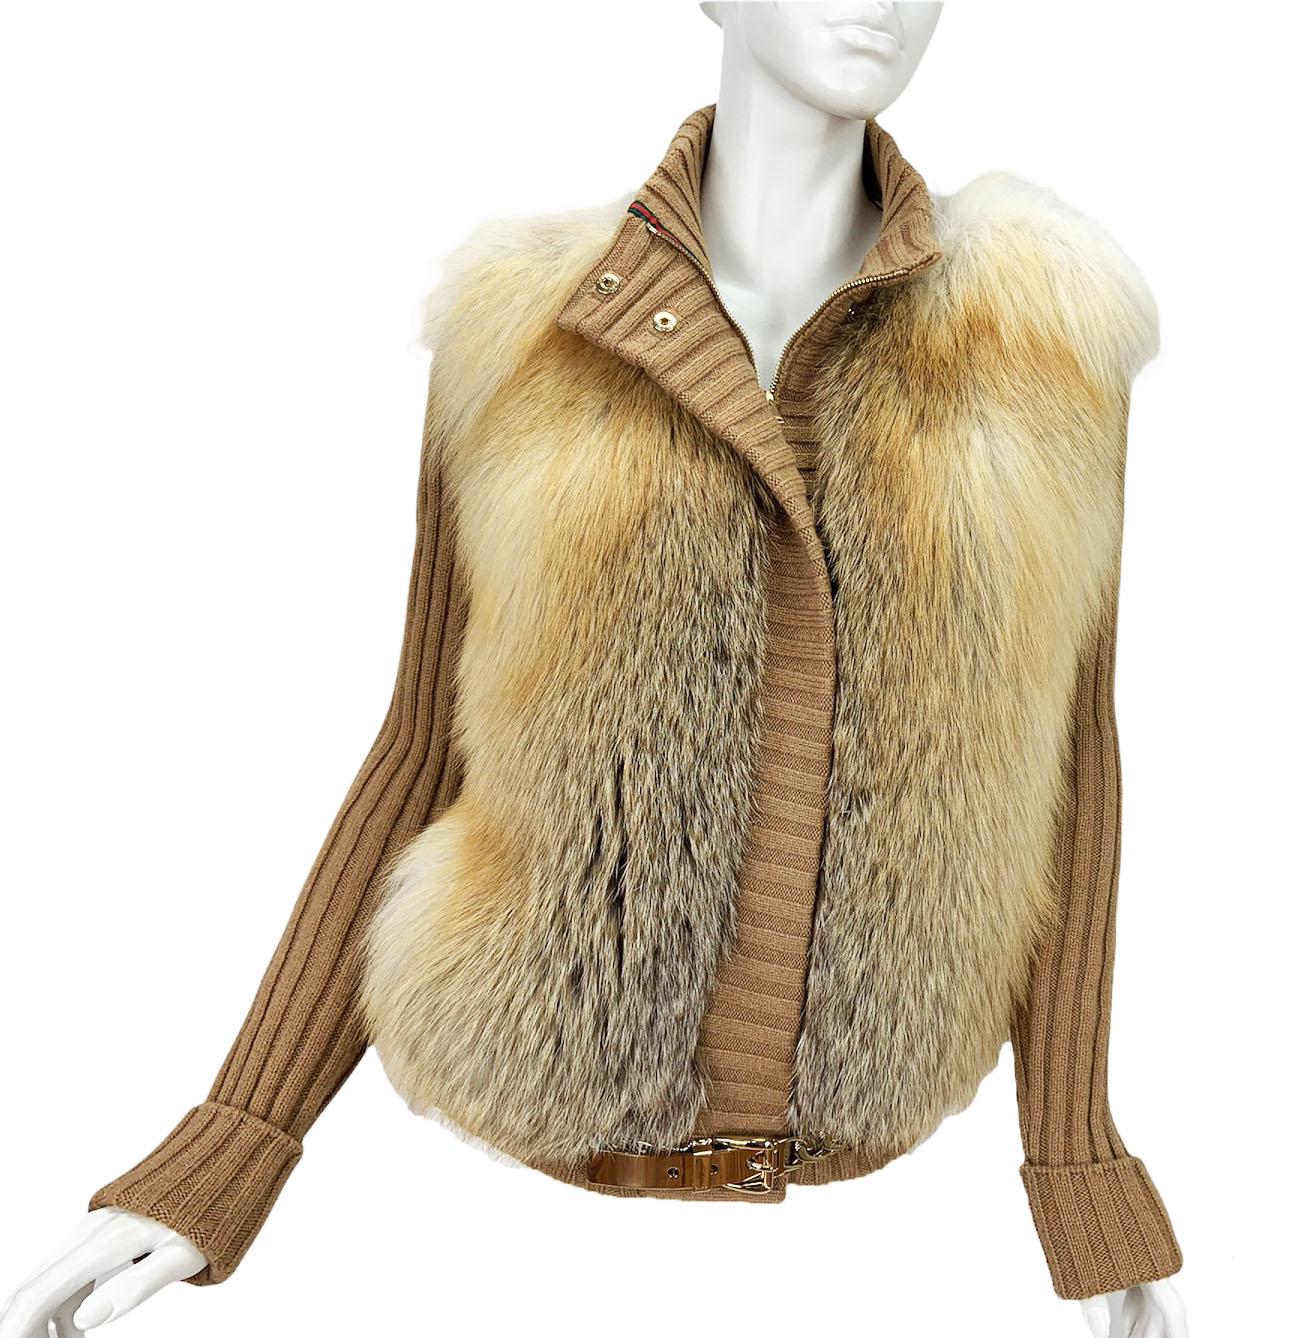 Gucci Camel Hair Fox Fur Knit Cardigan Jacket
Designer size - L
100% Camel Hair, Fox Fur Front, Two Side Pockets, Gold - Tone Chain Buckle Metal Belt, Hidden Zip and Snaps Closure, Fully Lined.
Measurements: Length - 23 inches, Bust - 34